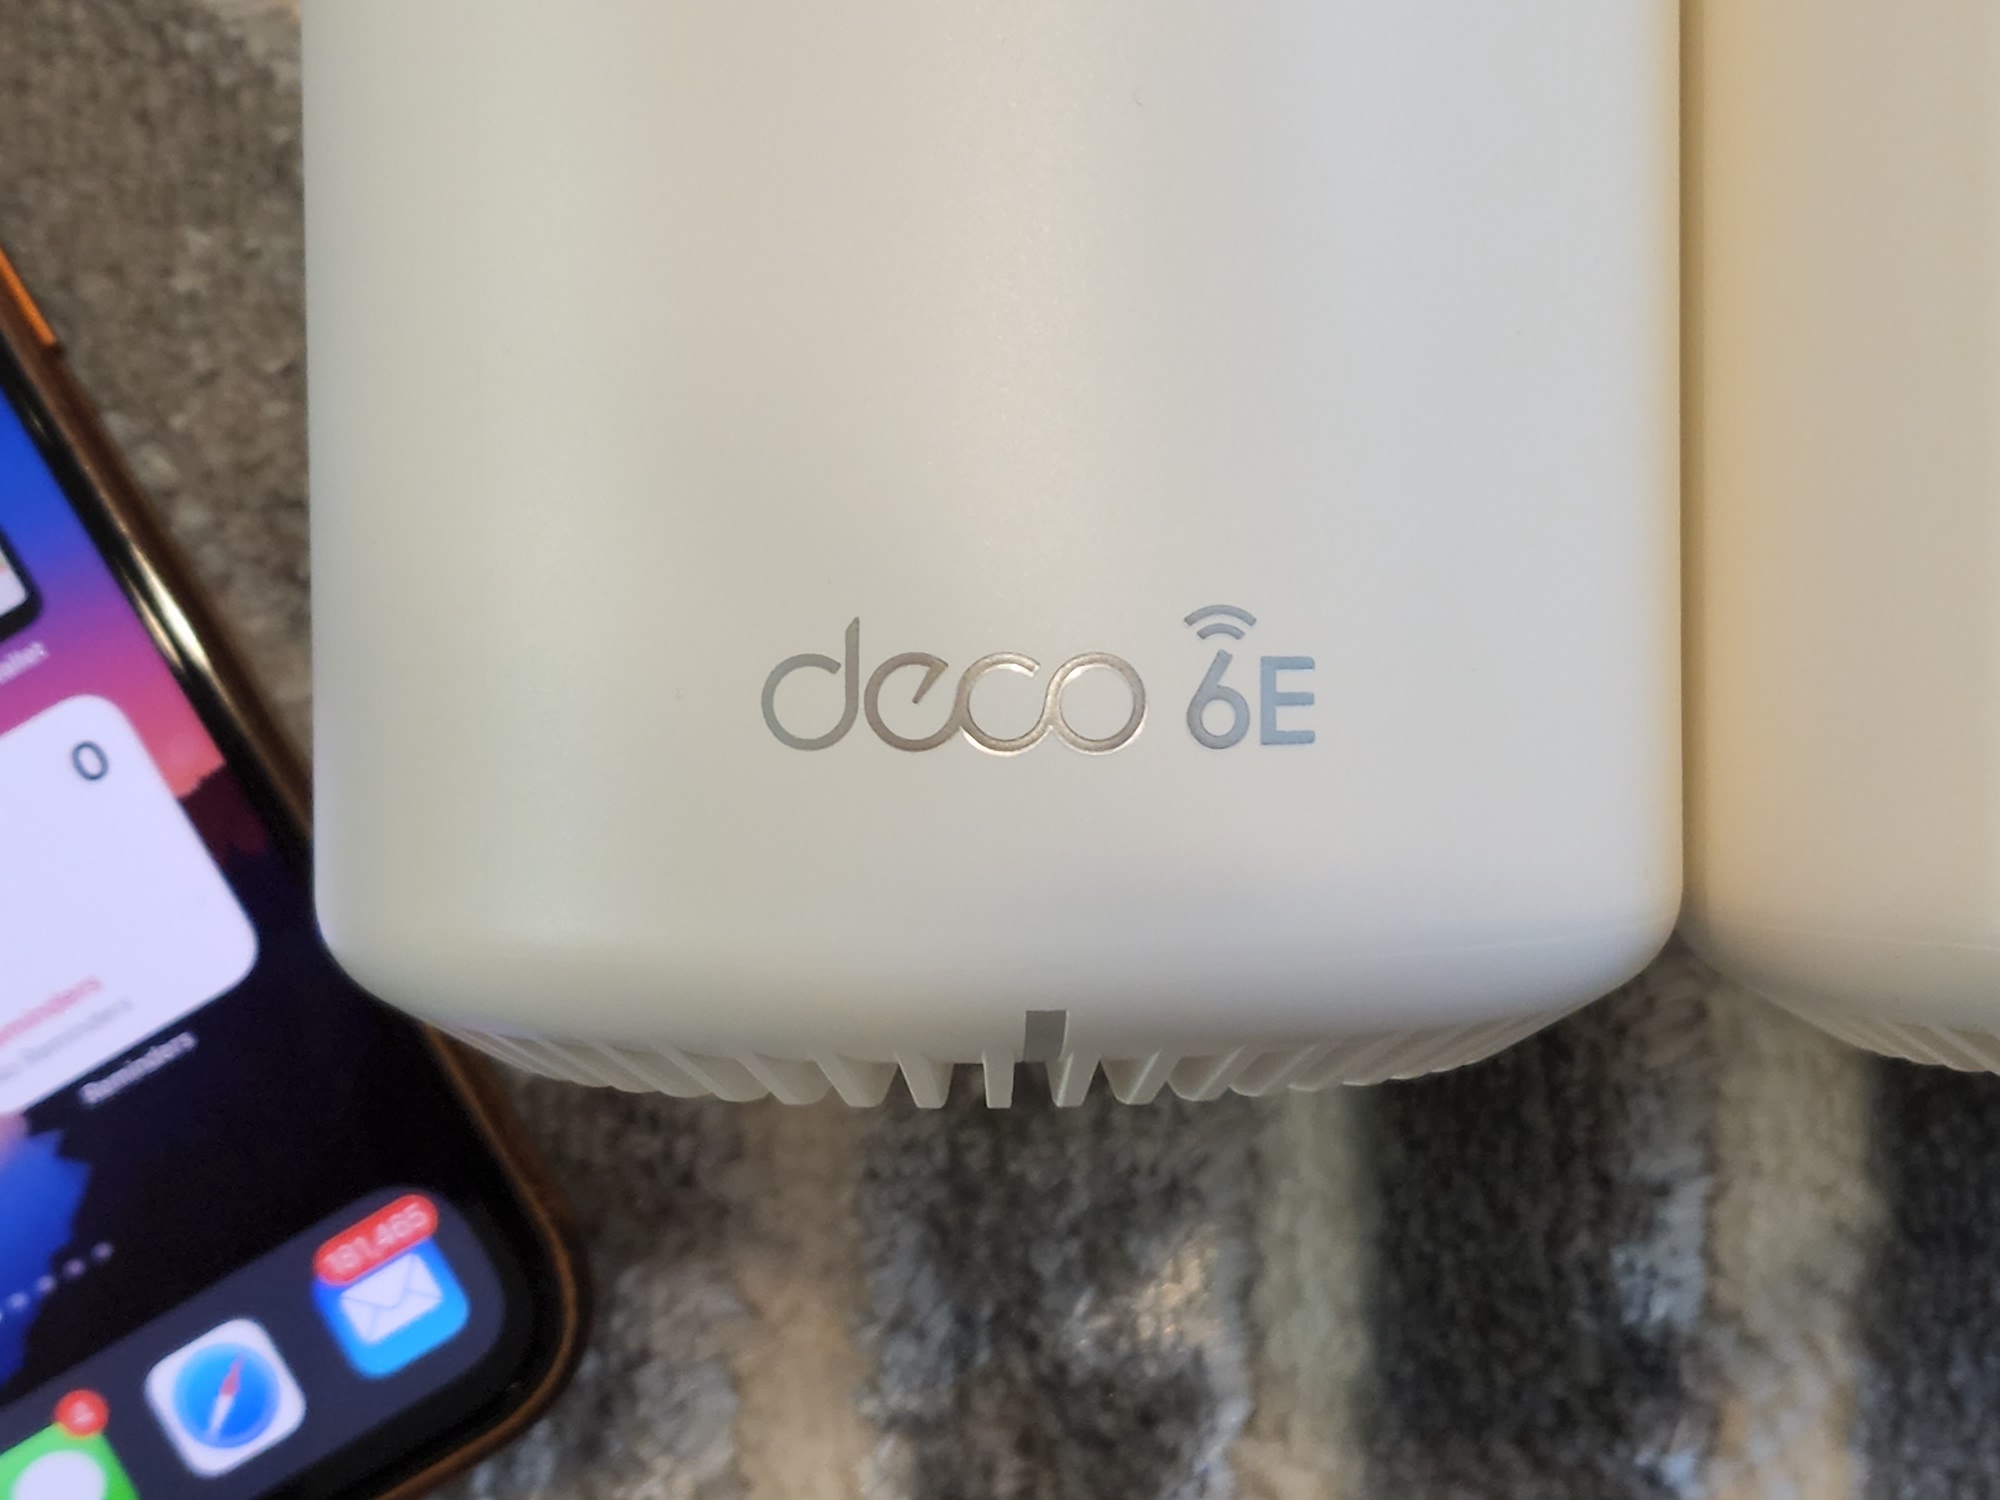 Deco X5400 Pro, AX5400 Whole Home Mesh Wi-Fi 6 System